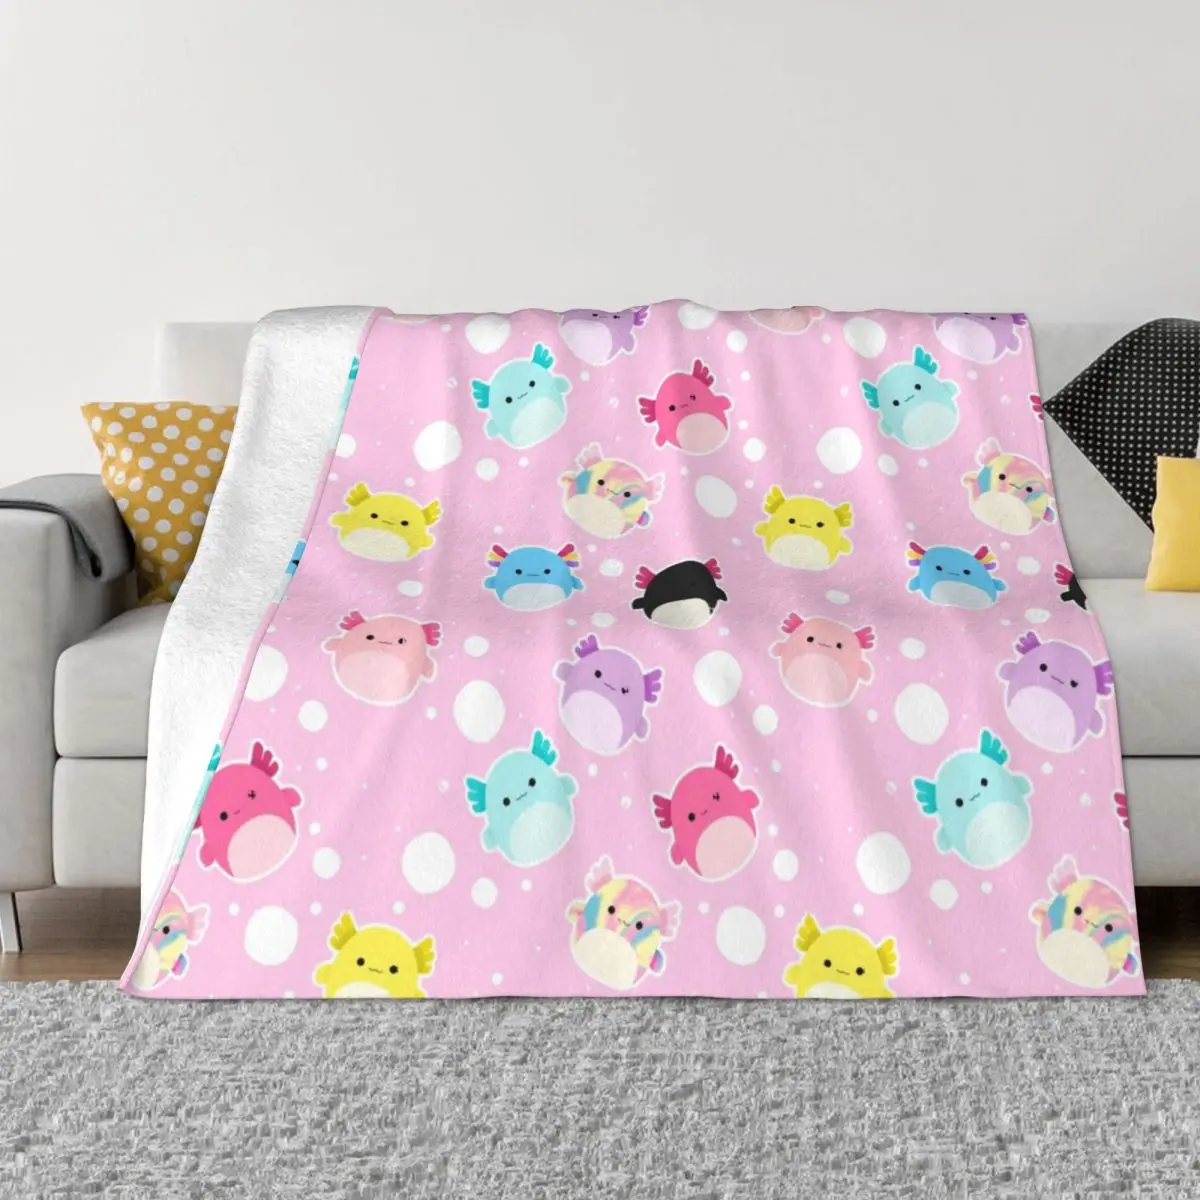 

Axolotl Squish Party Squishmallows Cute Cartoon Doll Blanket Fleece Printed Soft Throw Blanket for Bed Travel Plush Thin Quilt